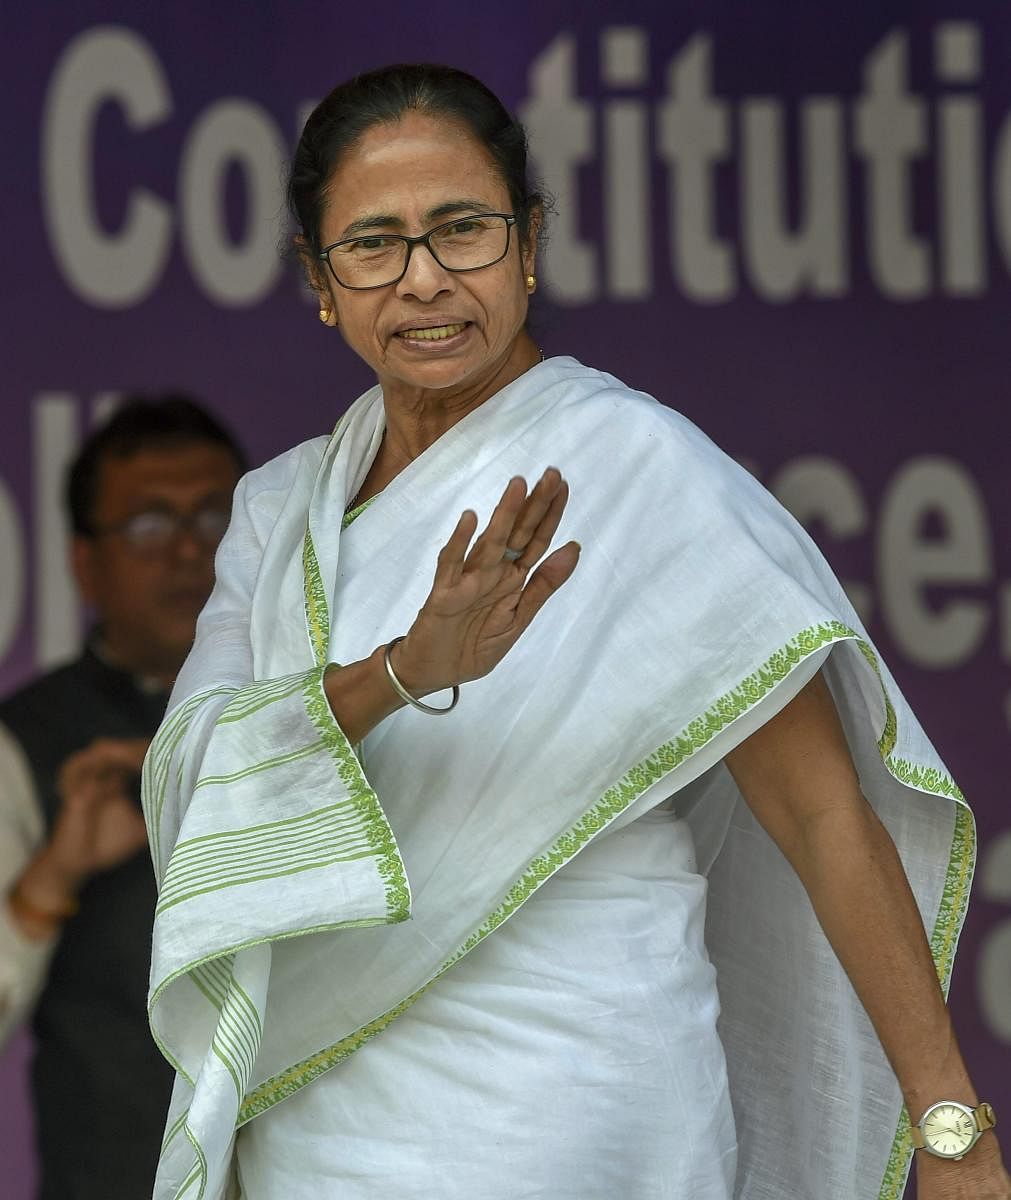 West Bengal Chief Minister Mamata Banerjee during her sit-in protest over the CBI's attempt to question the Kolkata Police commissioner in connection with chit fund scams, in Kolkata, Tuesday, February 5, 2019. PTI